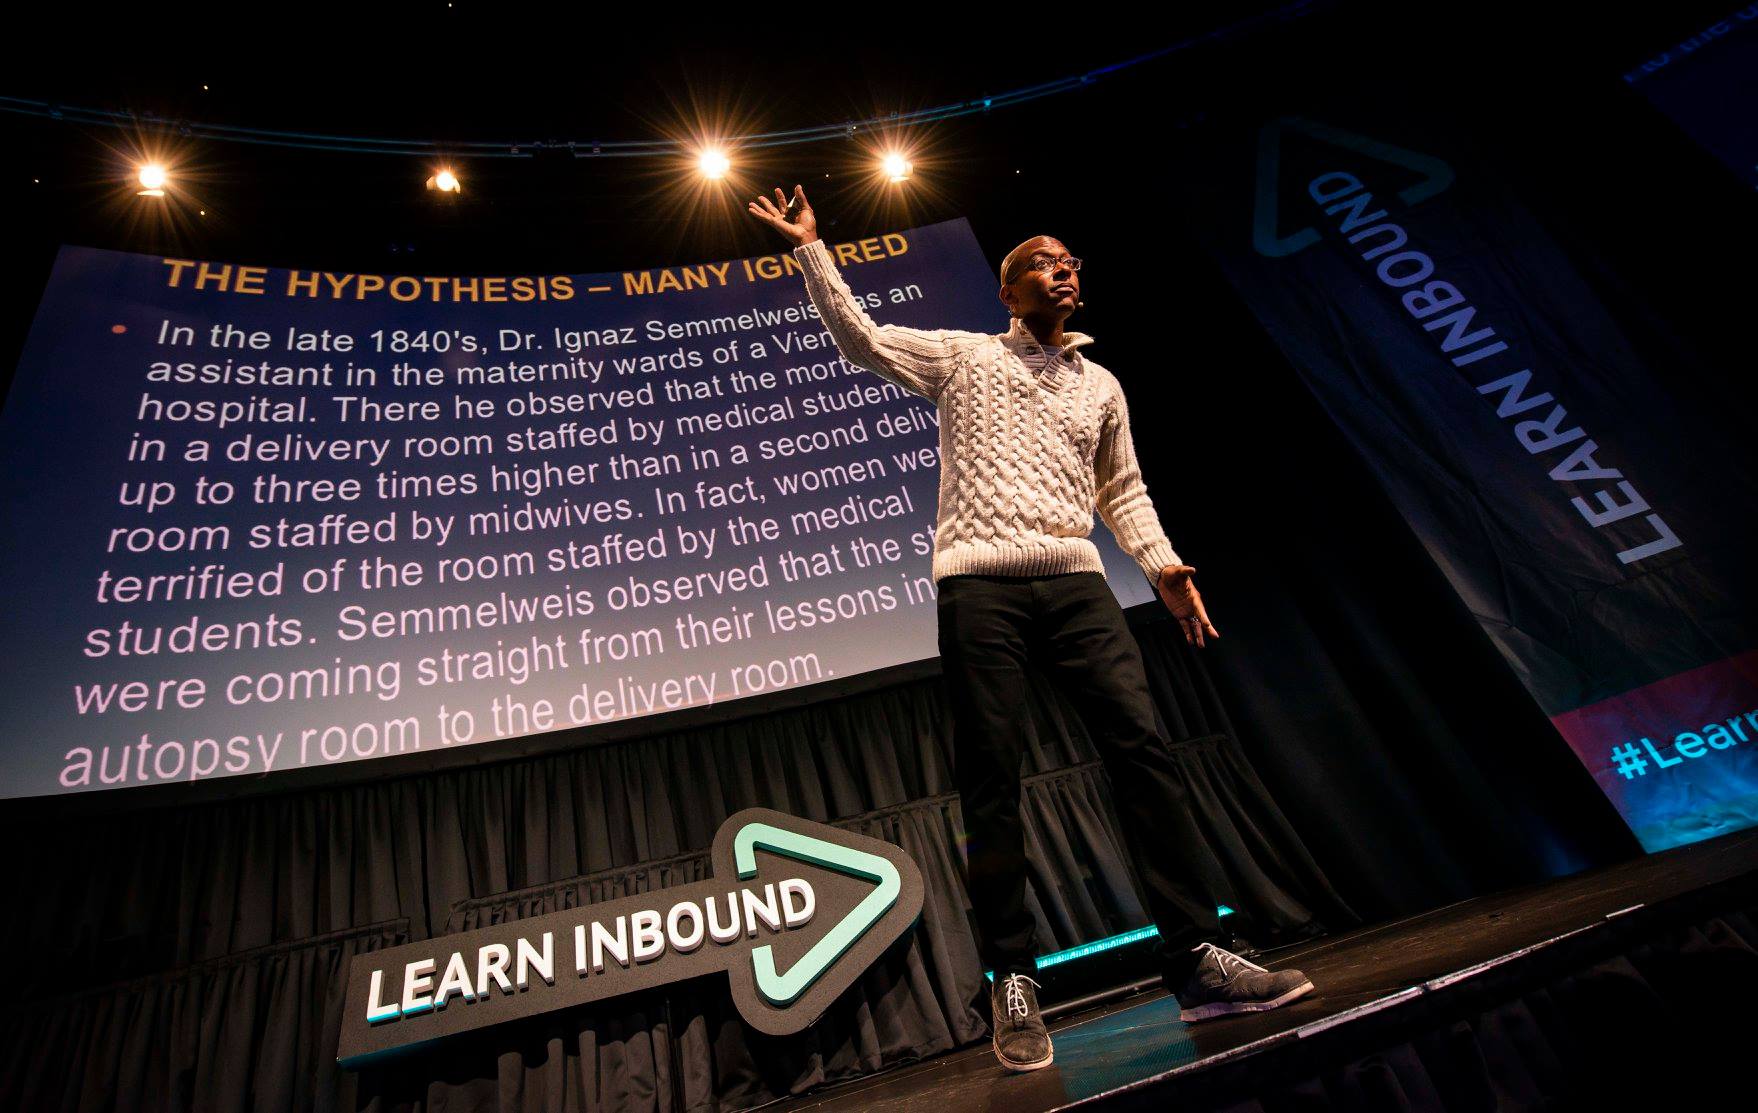 Wil Reynolds on stage at Learn Inbound Dublin